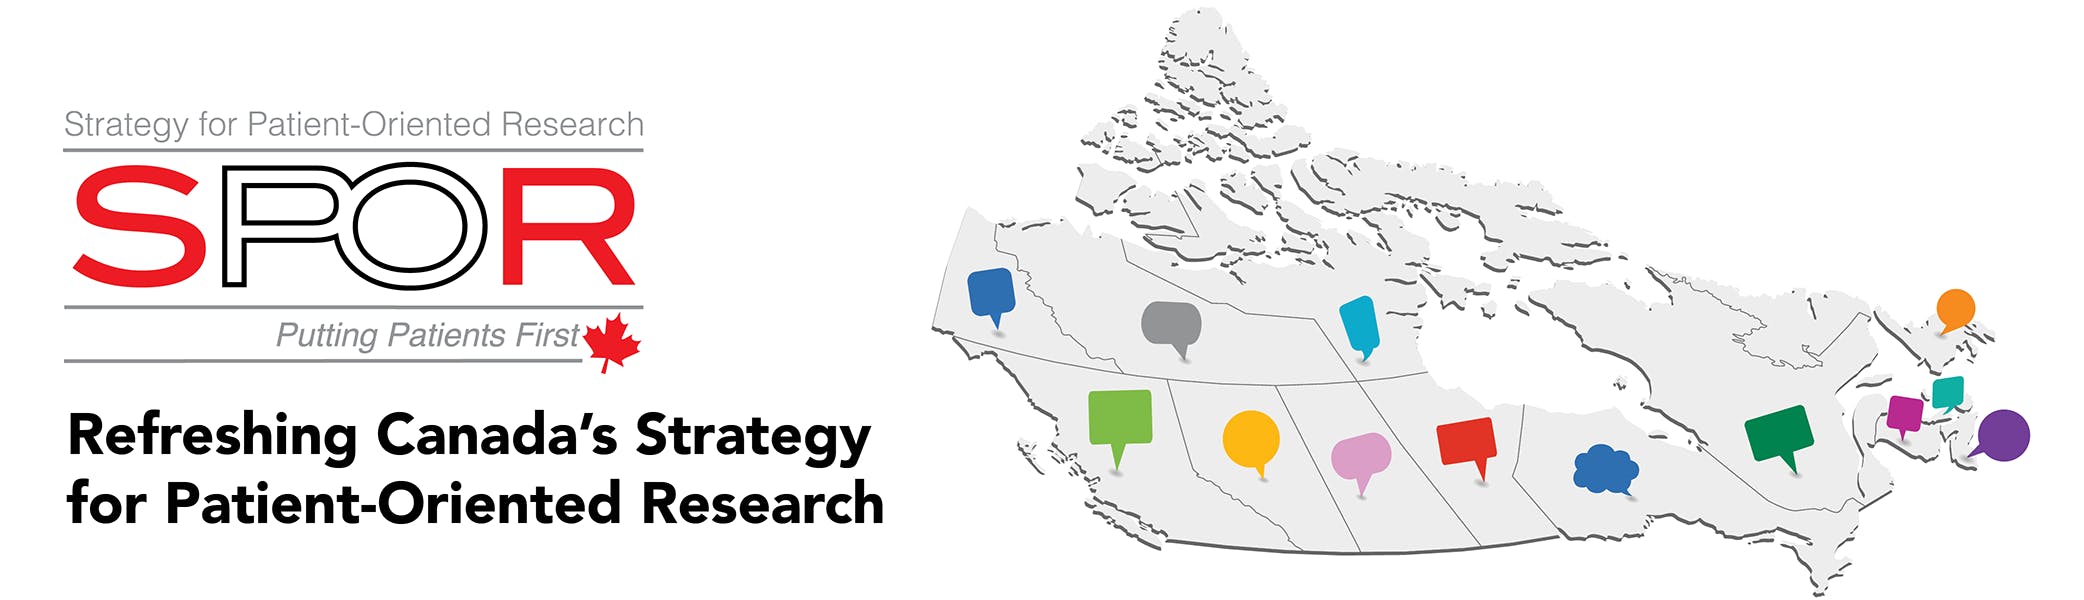 SPOR: Refreshing Canada's Strategy for Patient-Oriented Research banner